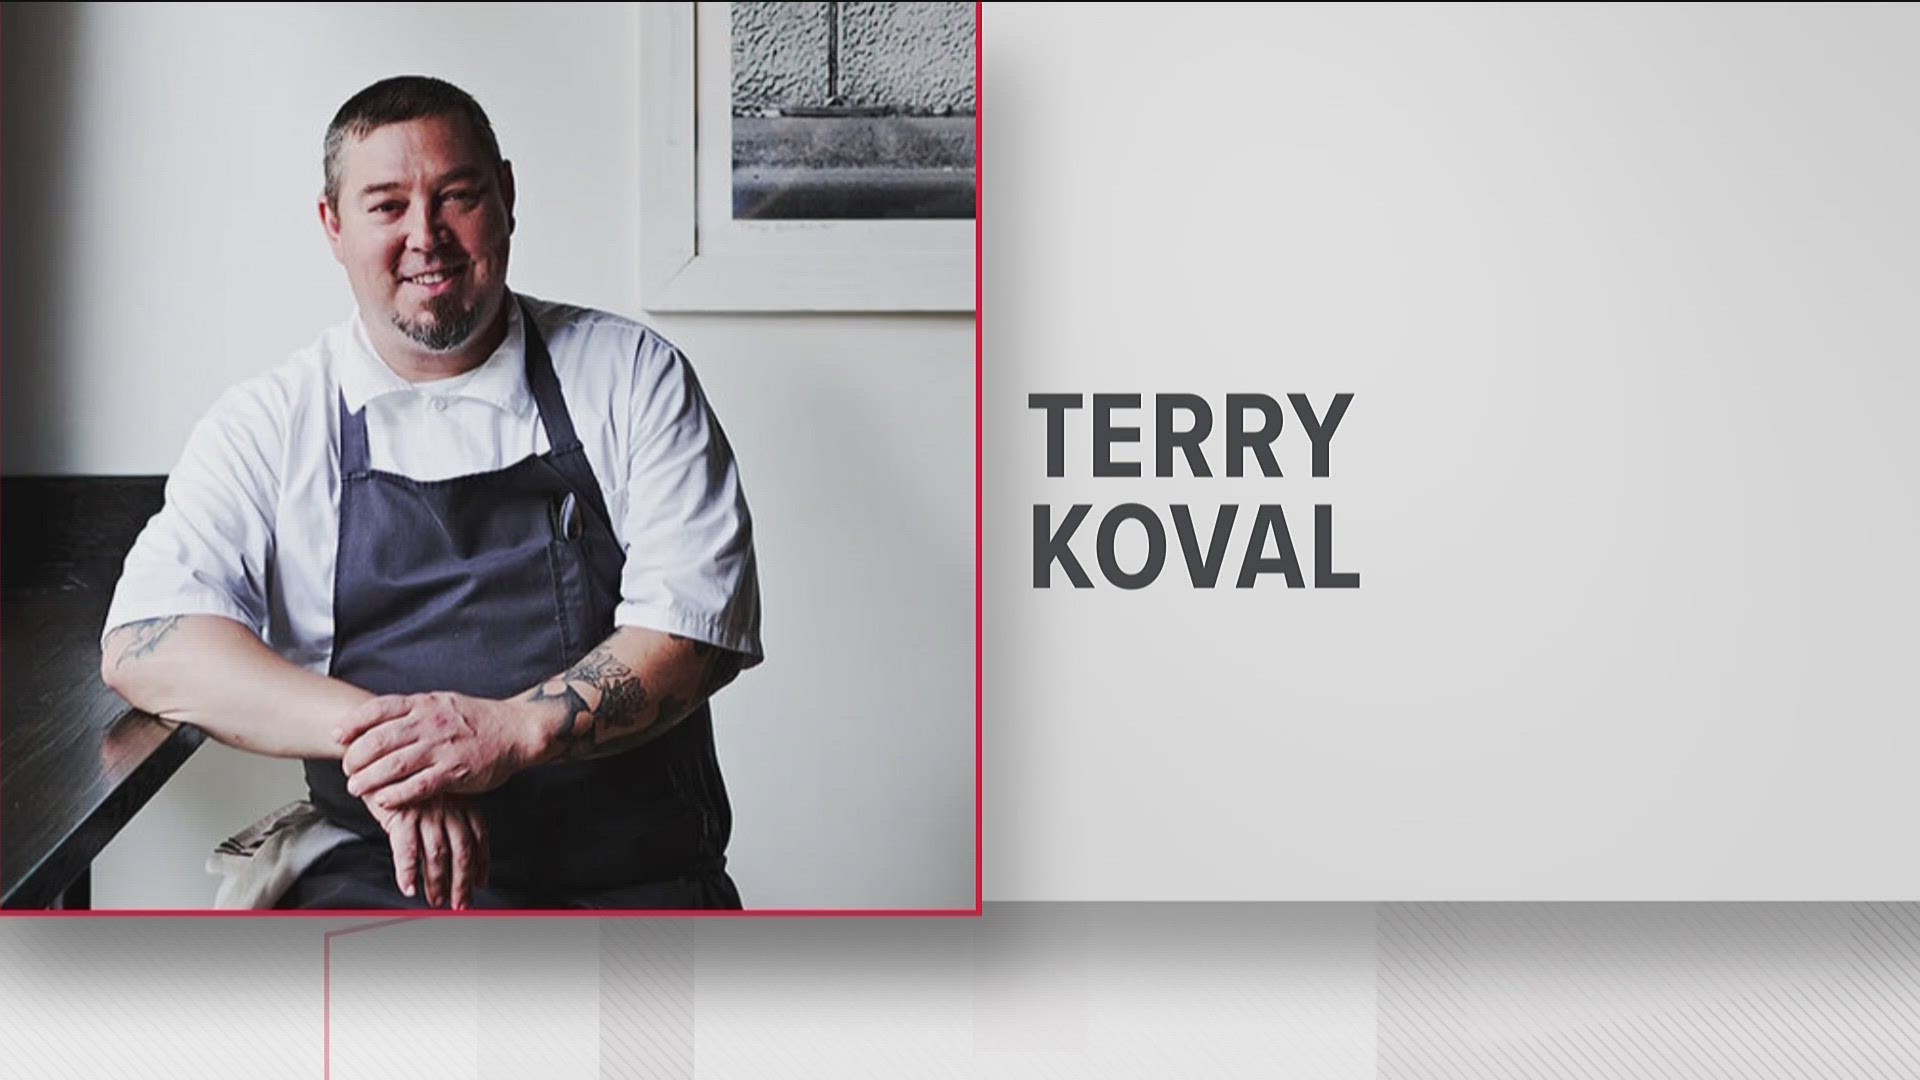 Terry Koval was named 'Best Chef in the South East.'